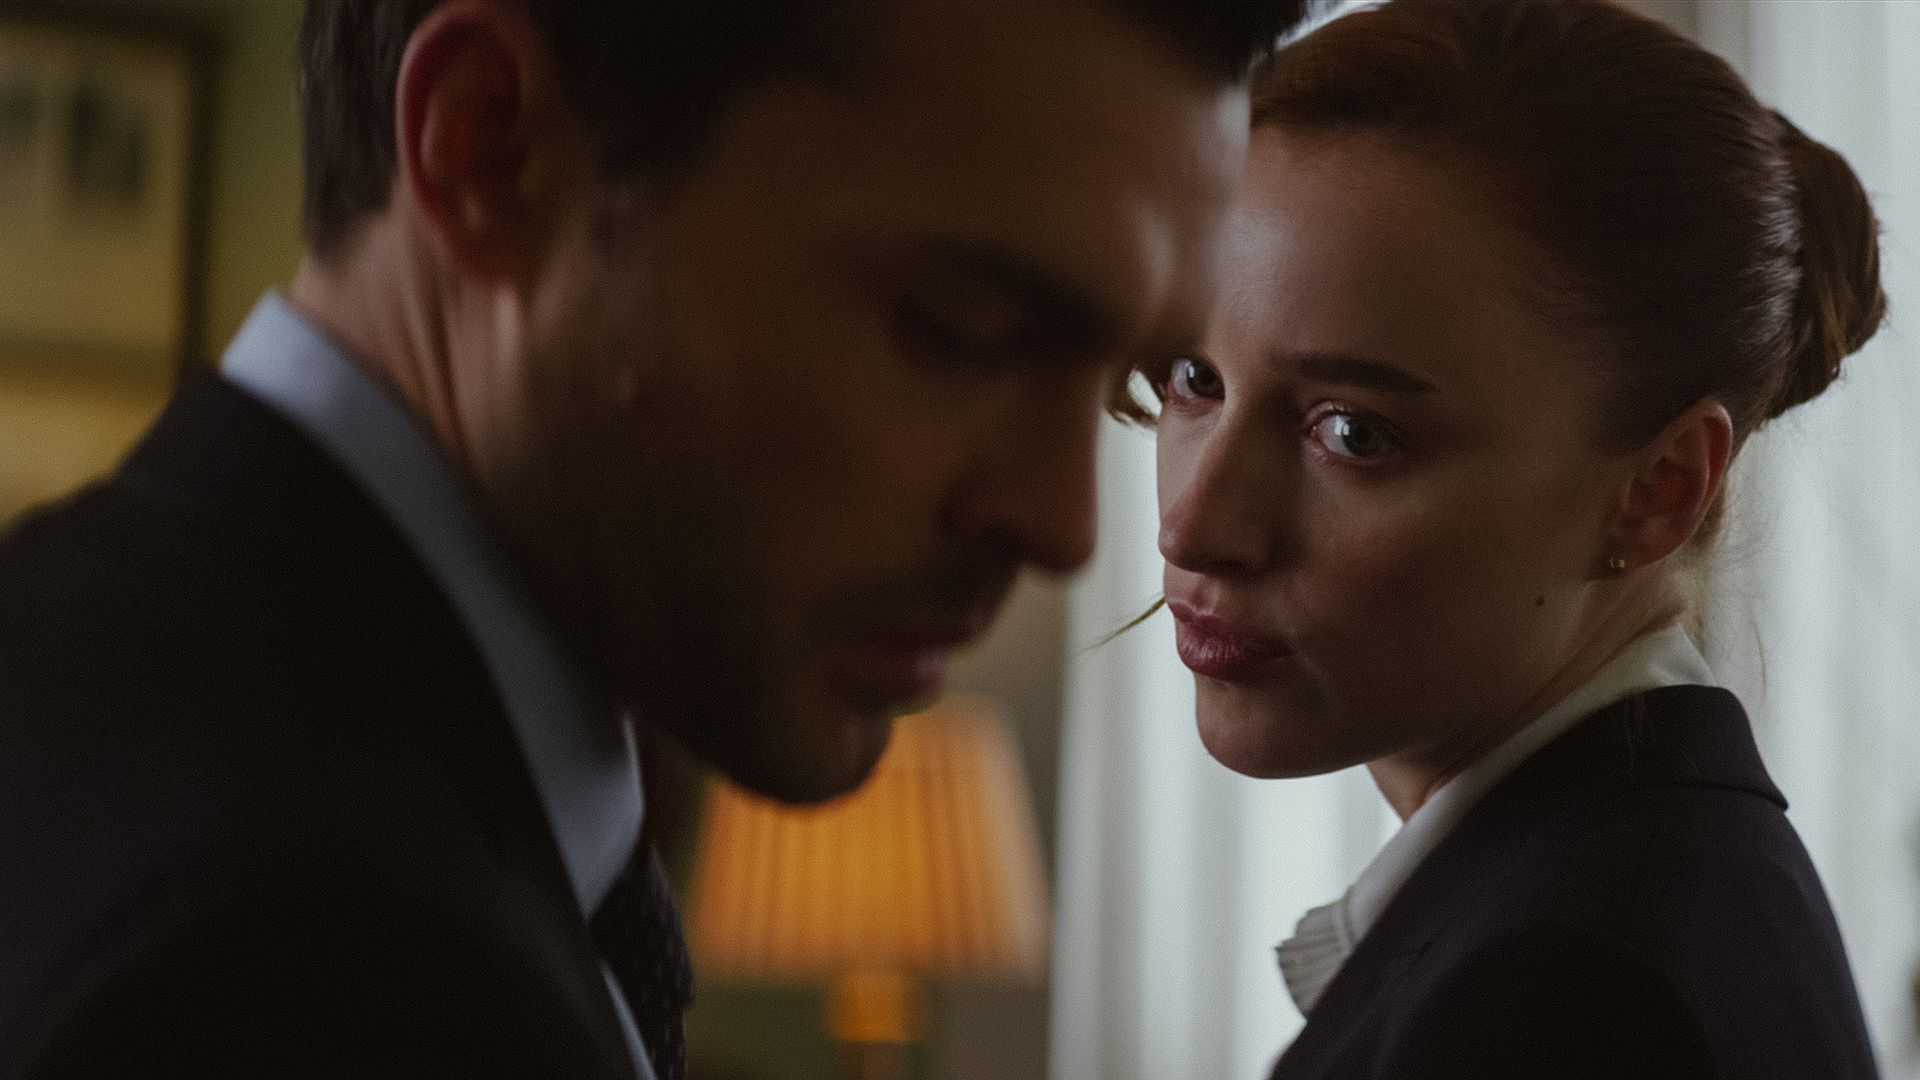 Phoebe Dynevor and Alden Ehrenreich appear in Fair Play by Chloe Domont, an official selection oft he U.S.Dramatic Competition at the 2023 Sundance Film Festival.